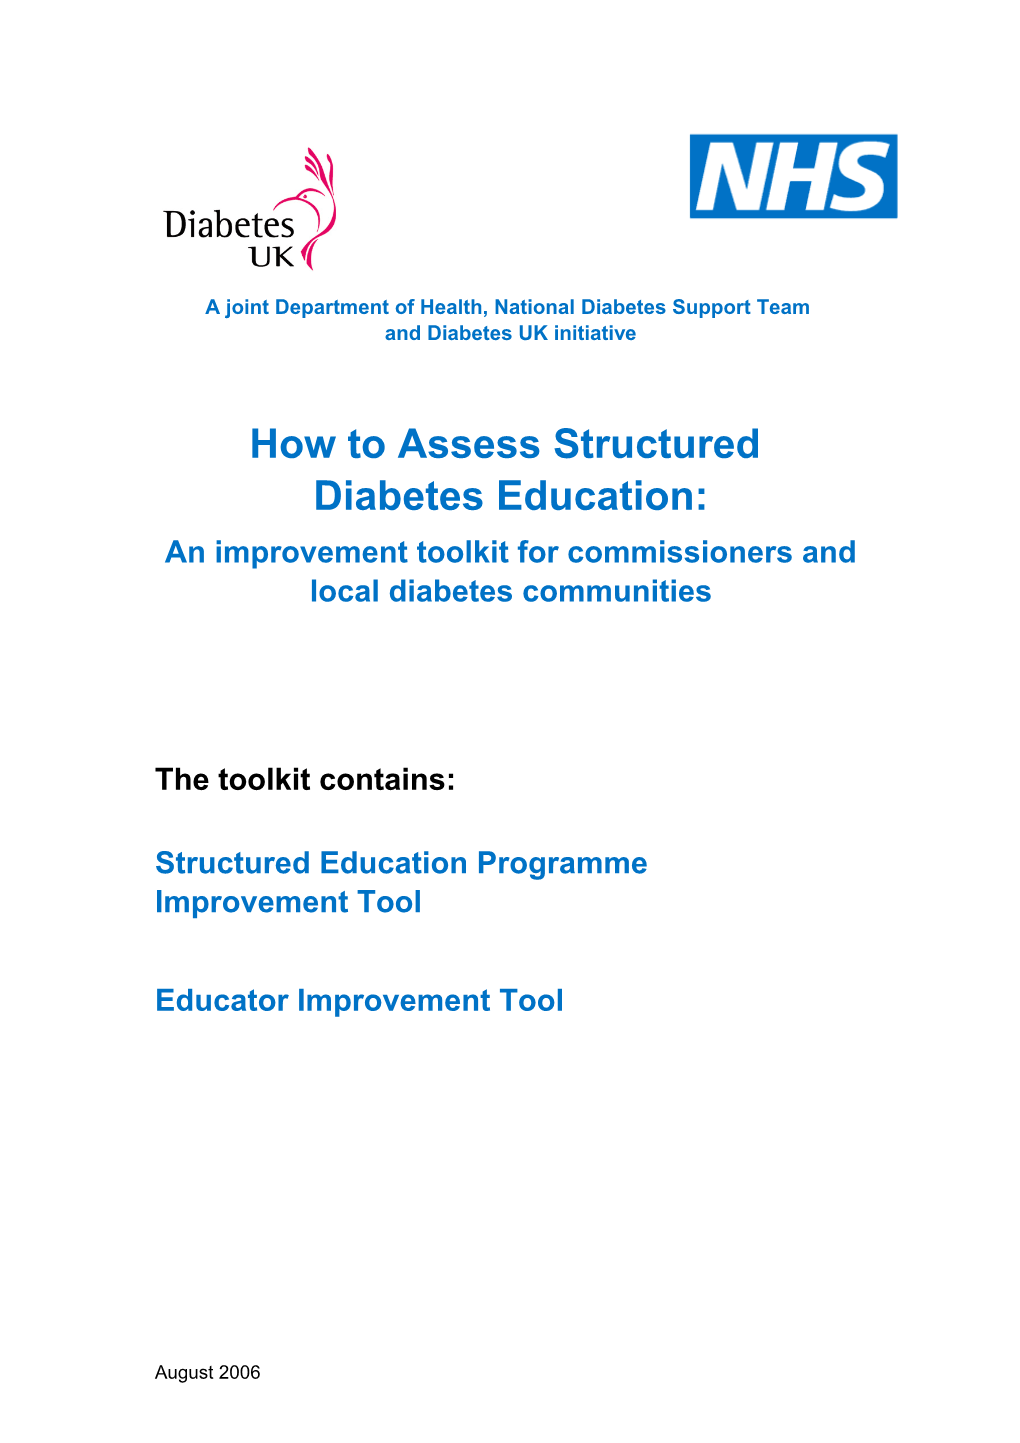 DOH Structured Diabetes Education Self Assessment Tool